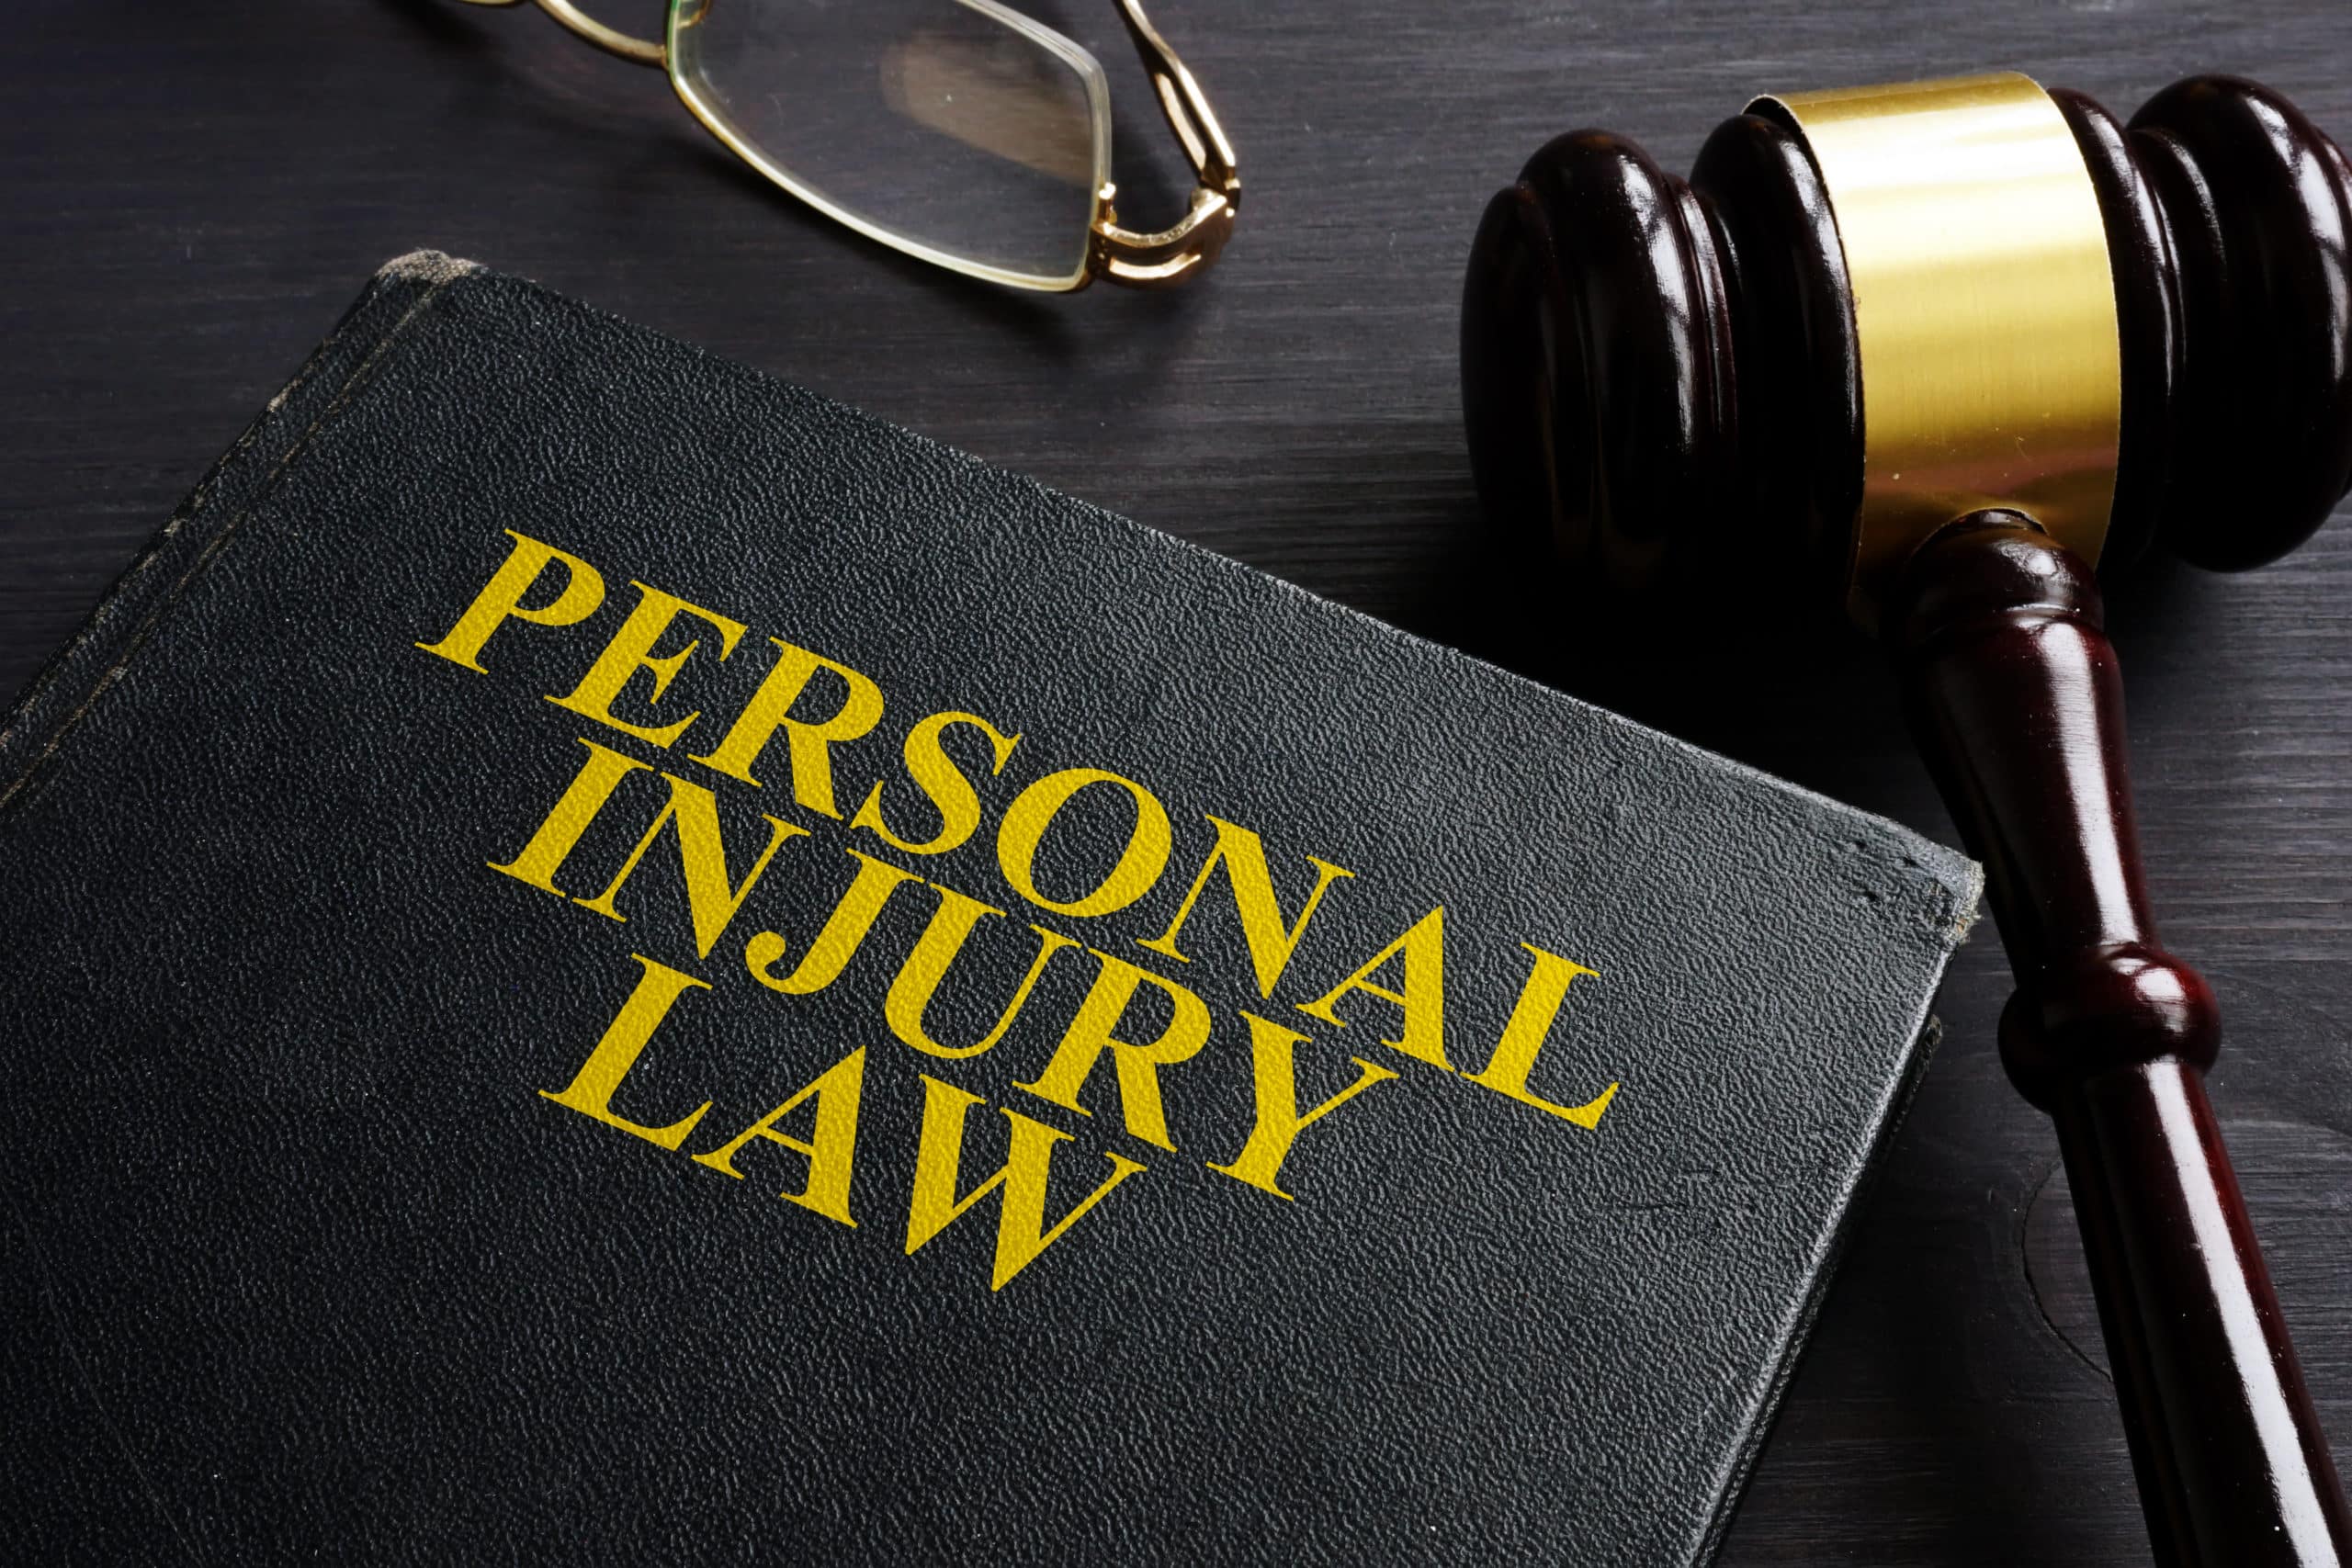 7 Most Common Corpus Christi Personal Injury Cases